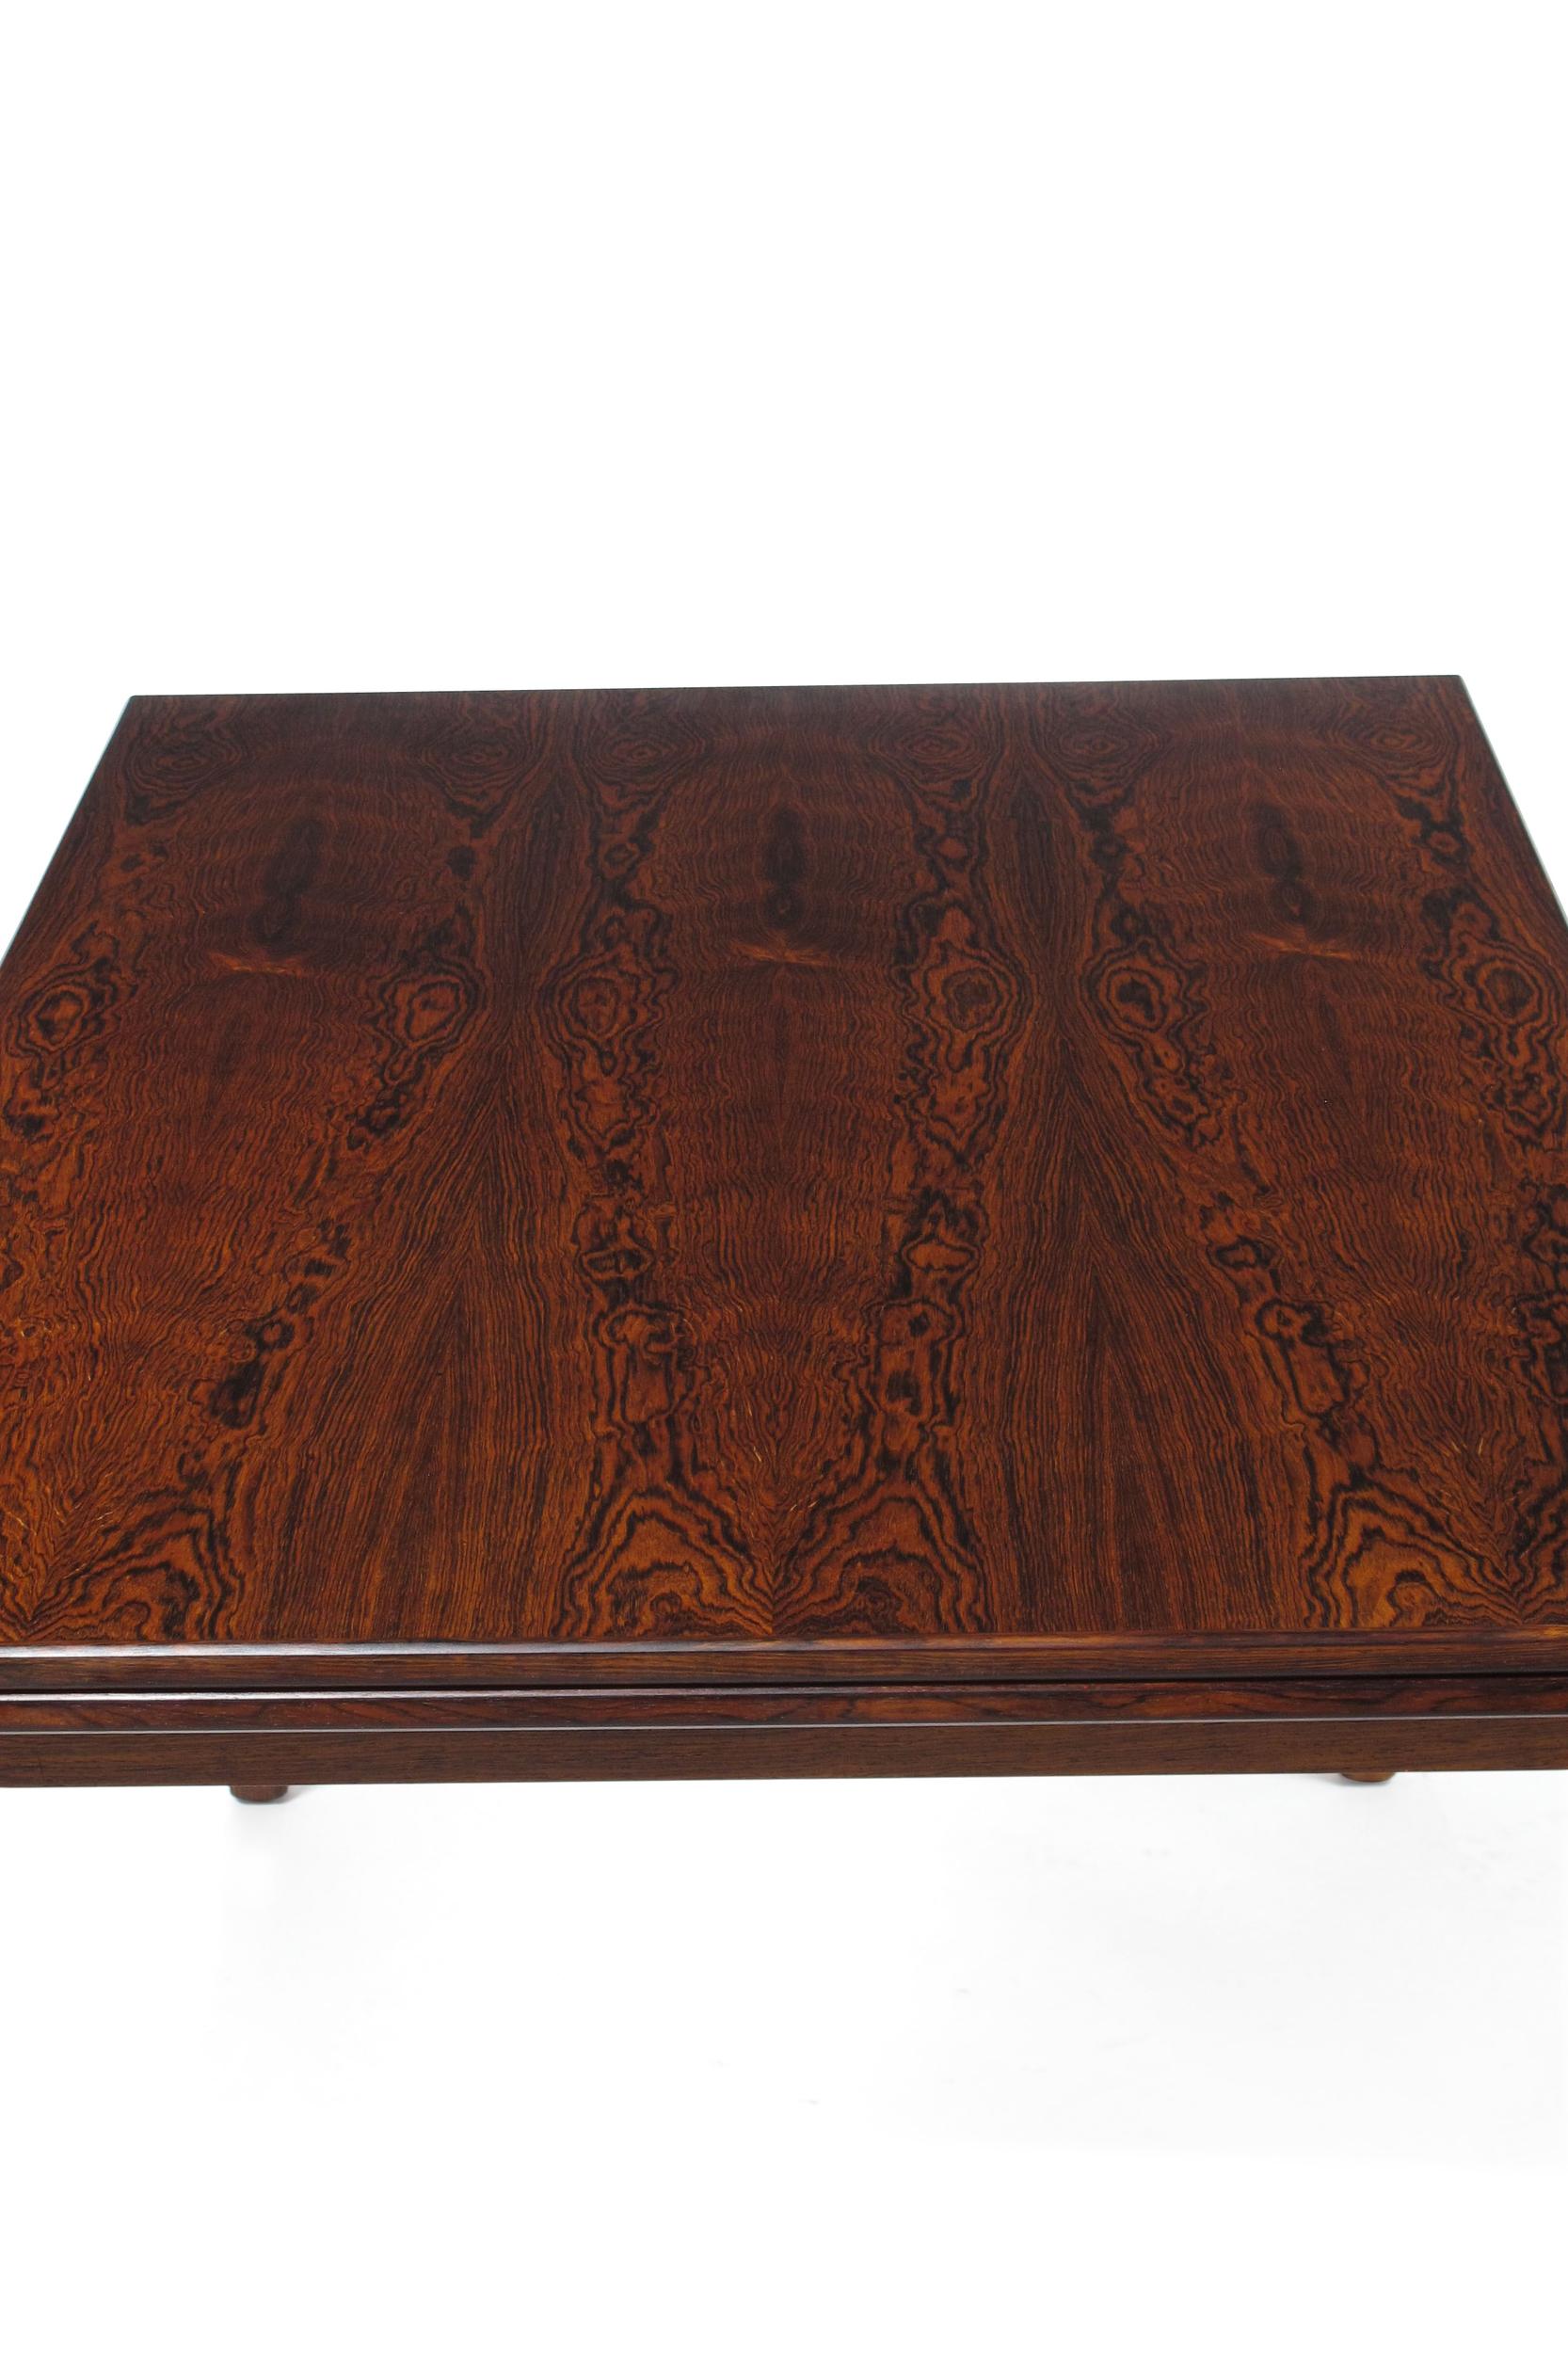 20th Century Midcentury Brazilian Rosewood Dining with Dramatic Grain